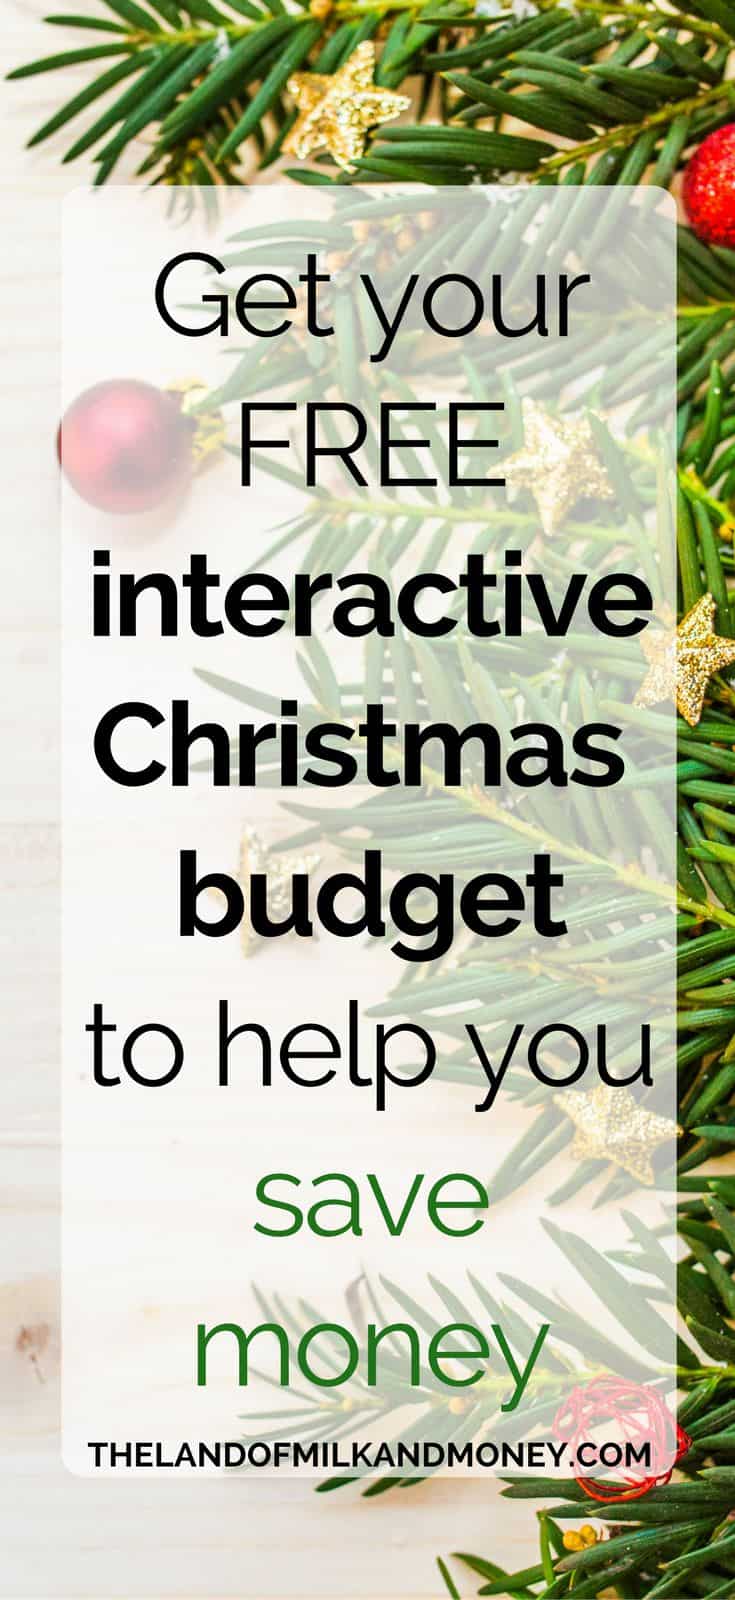 These money saving tips for how to do Christmas on a budget are incredible! I love having these simple ideas for having a frugal Christmas by saving money on holiday traditions. It's so hard to see how to save money at Christmas, but these are perfect for families like ours for decorating, food, shopping and more - all to have extra money! #christmas #holidays #frugal #savemoney